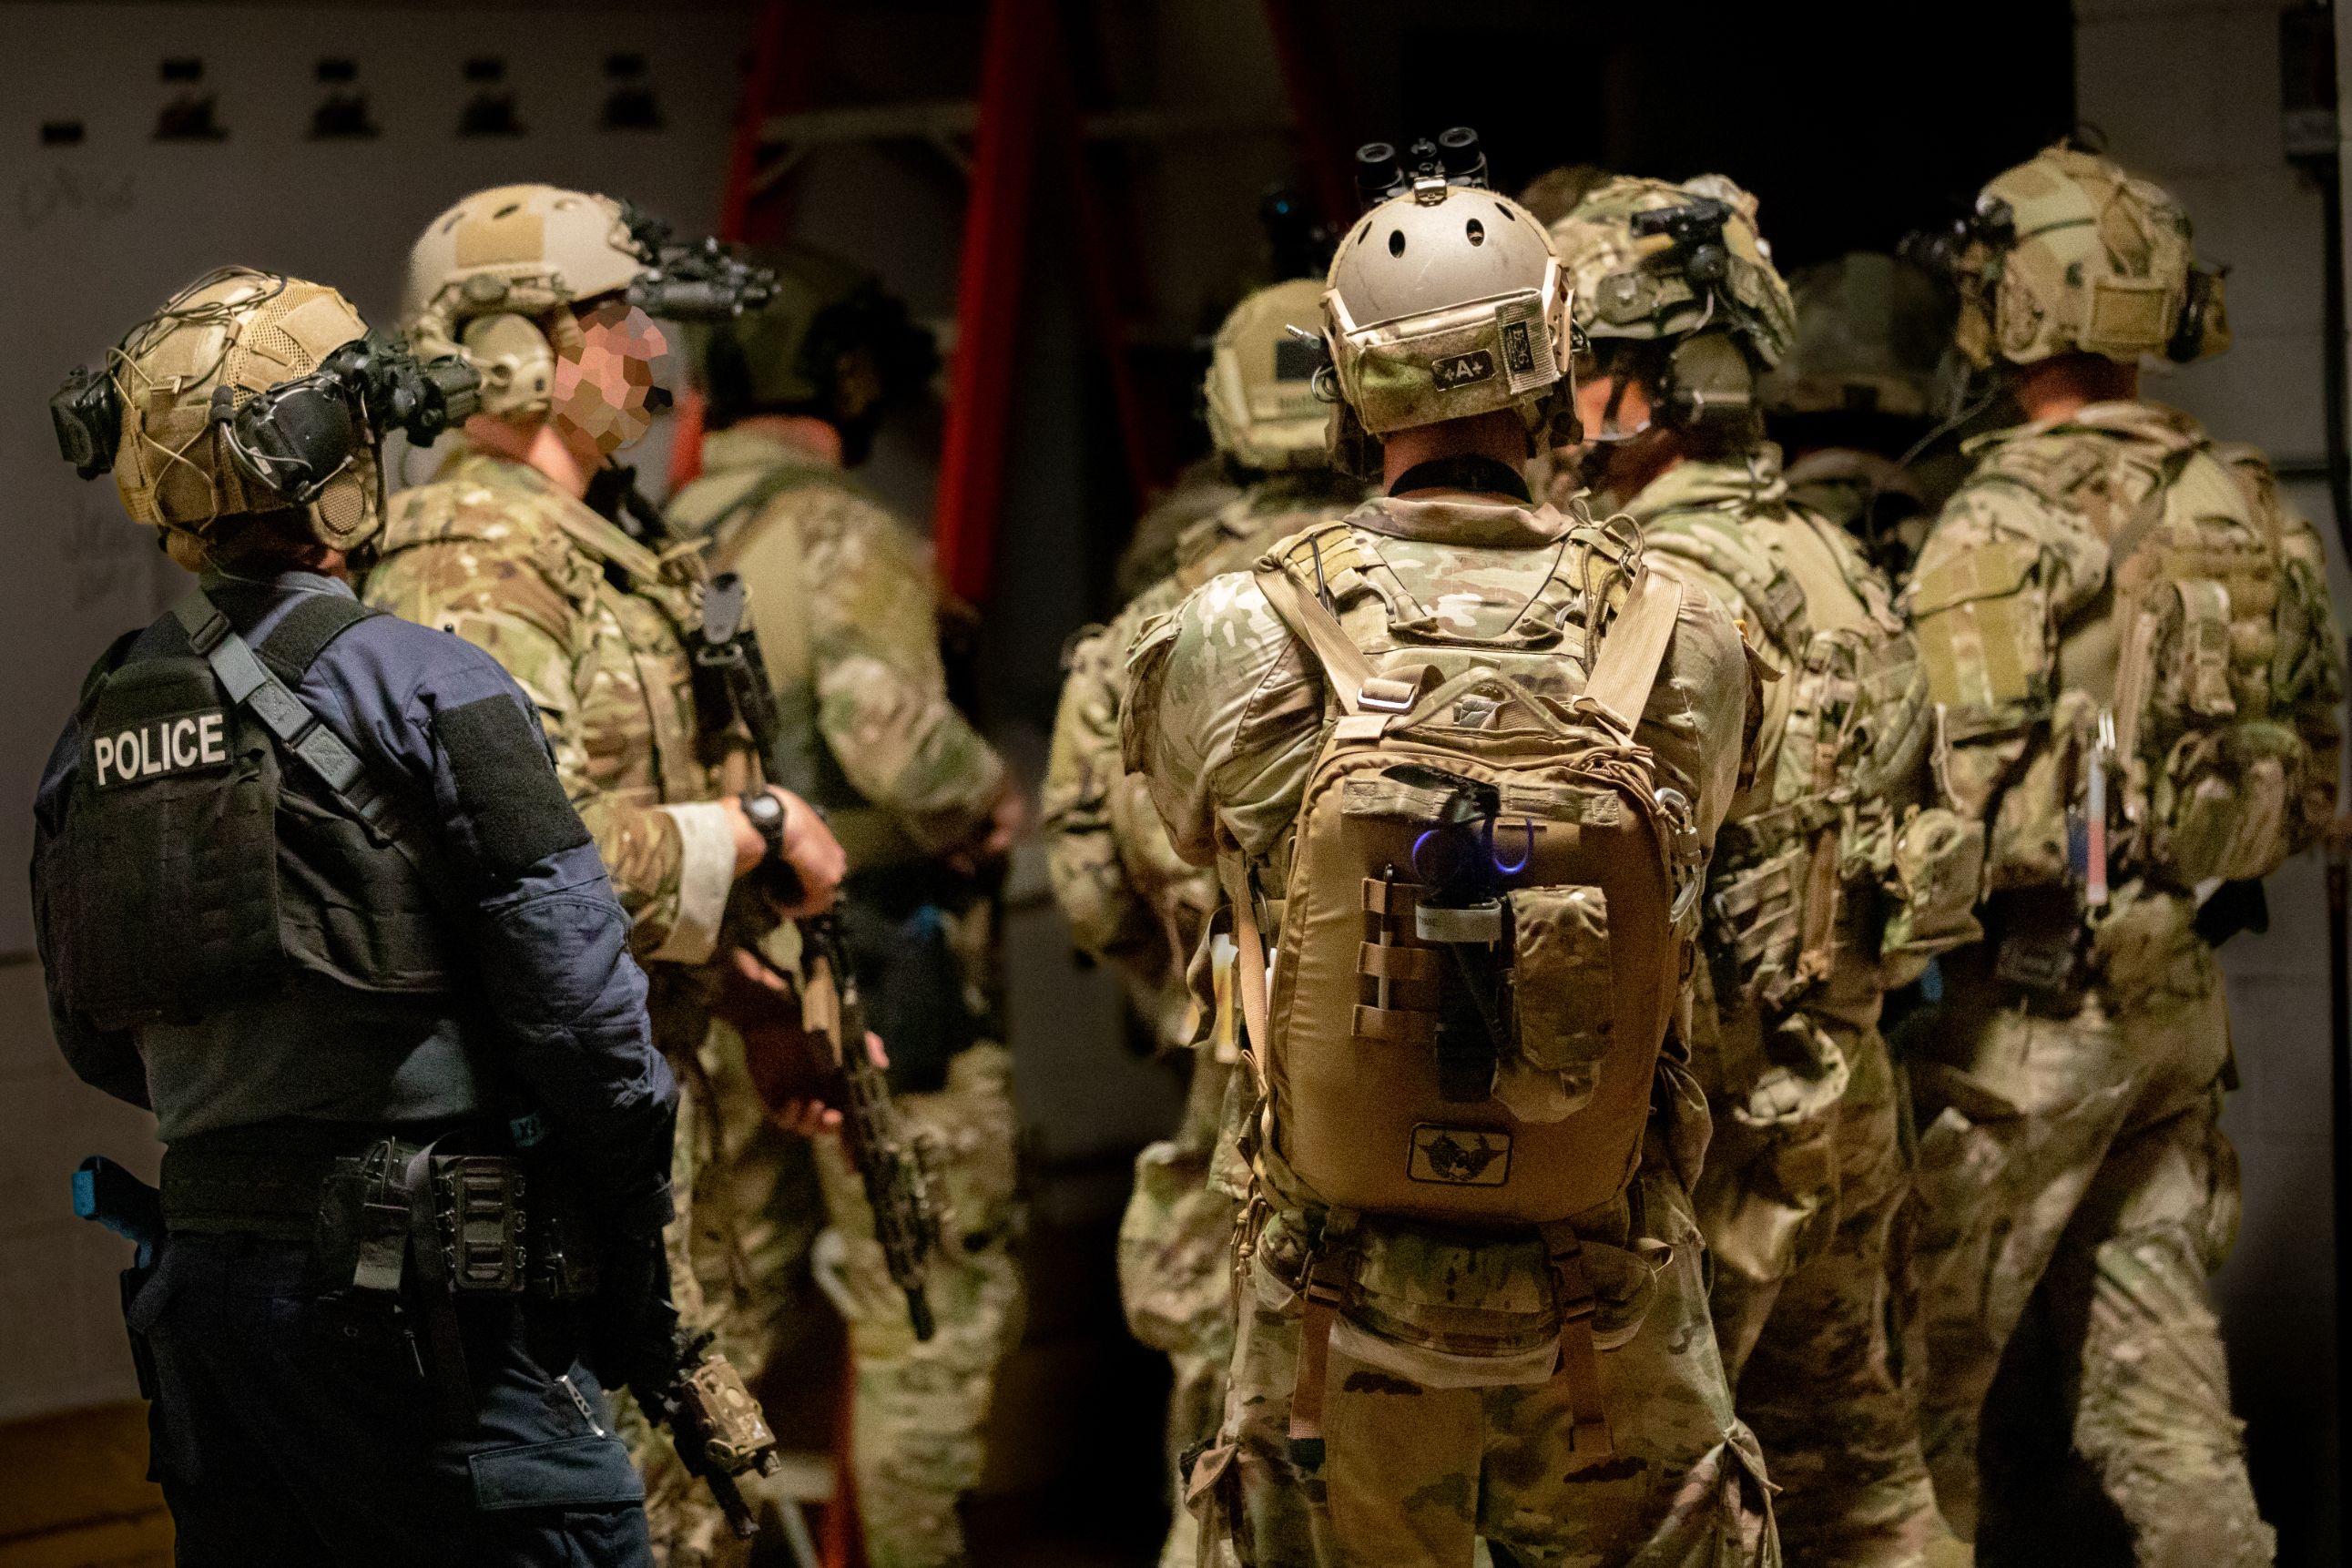 Operators plan their route through additional levels of an enemy compound during a training exercise in Battle Creek, Michigan, August 10, 2022.